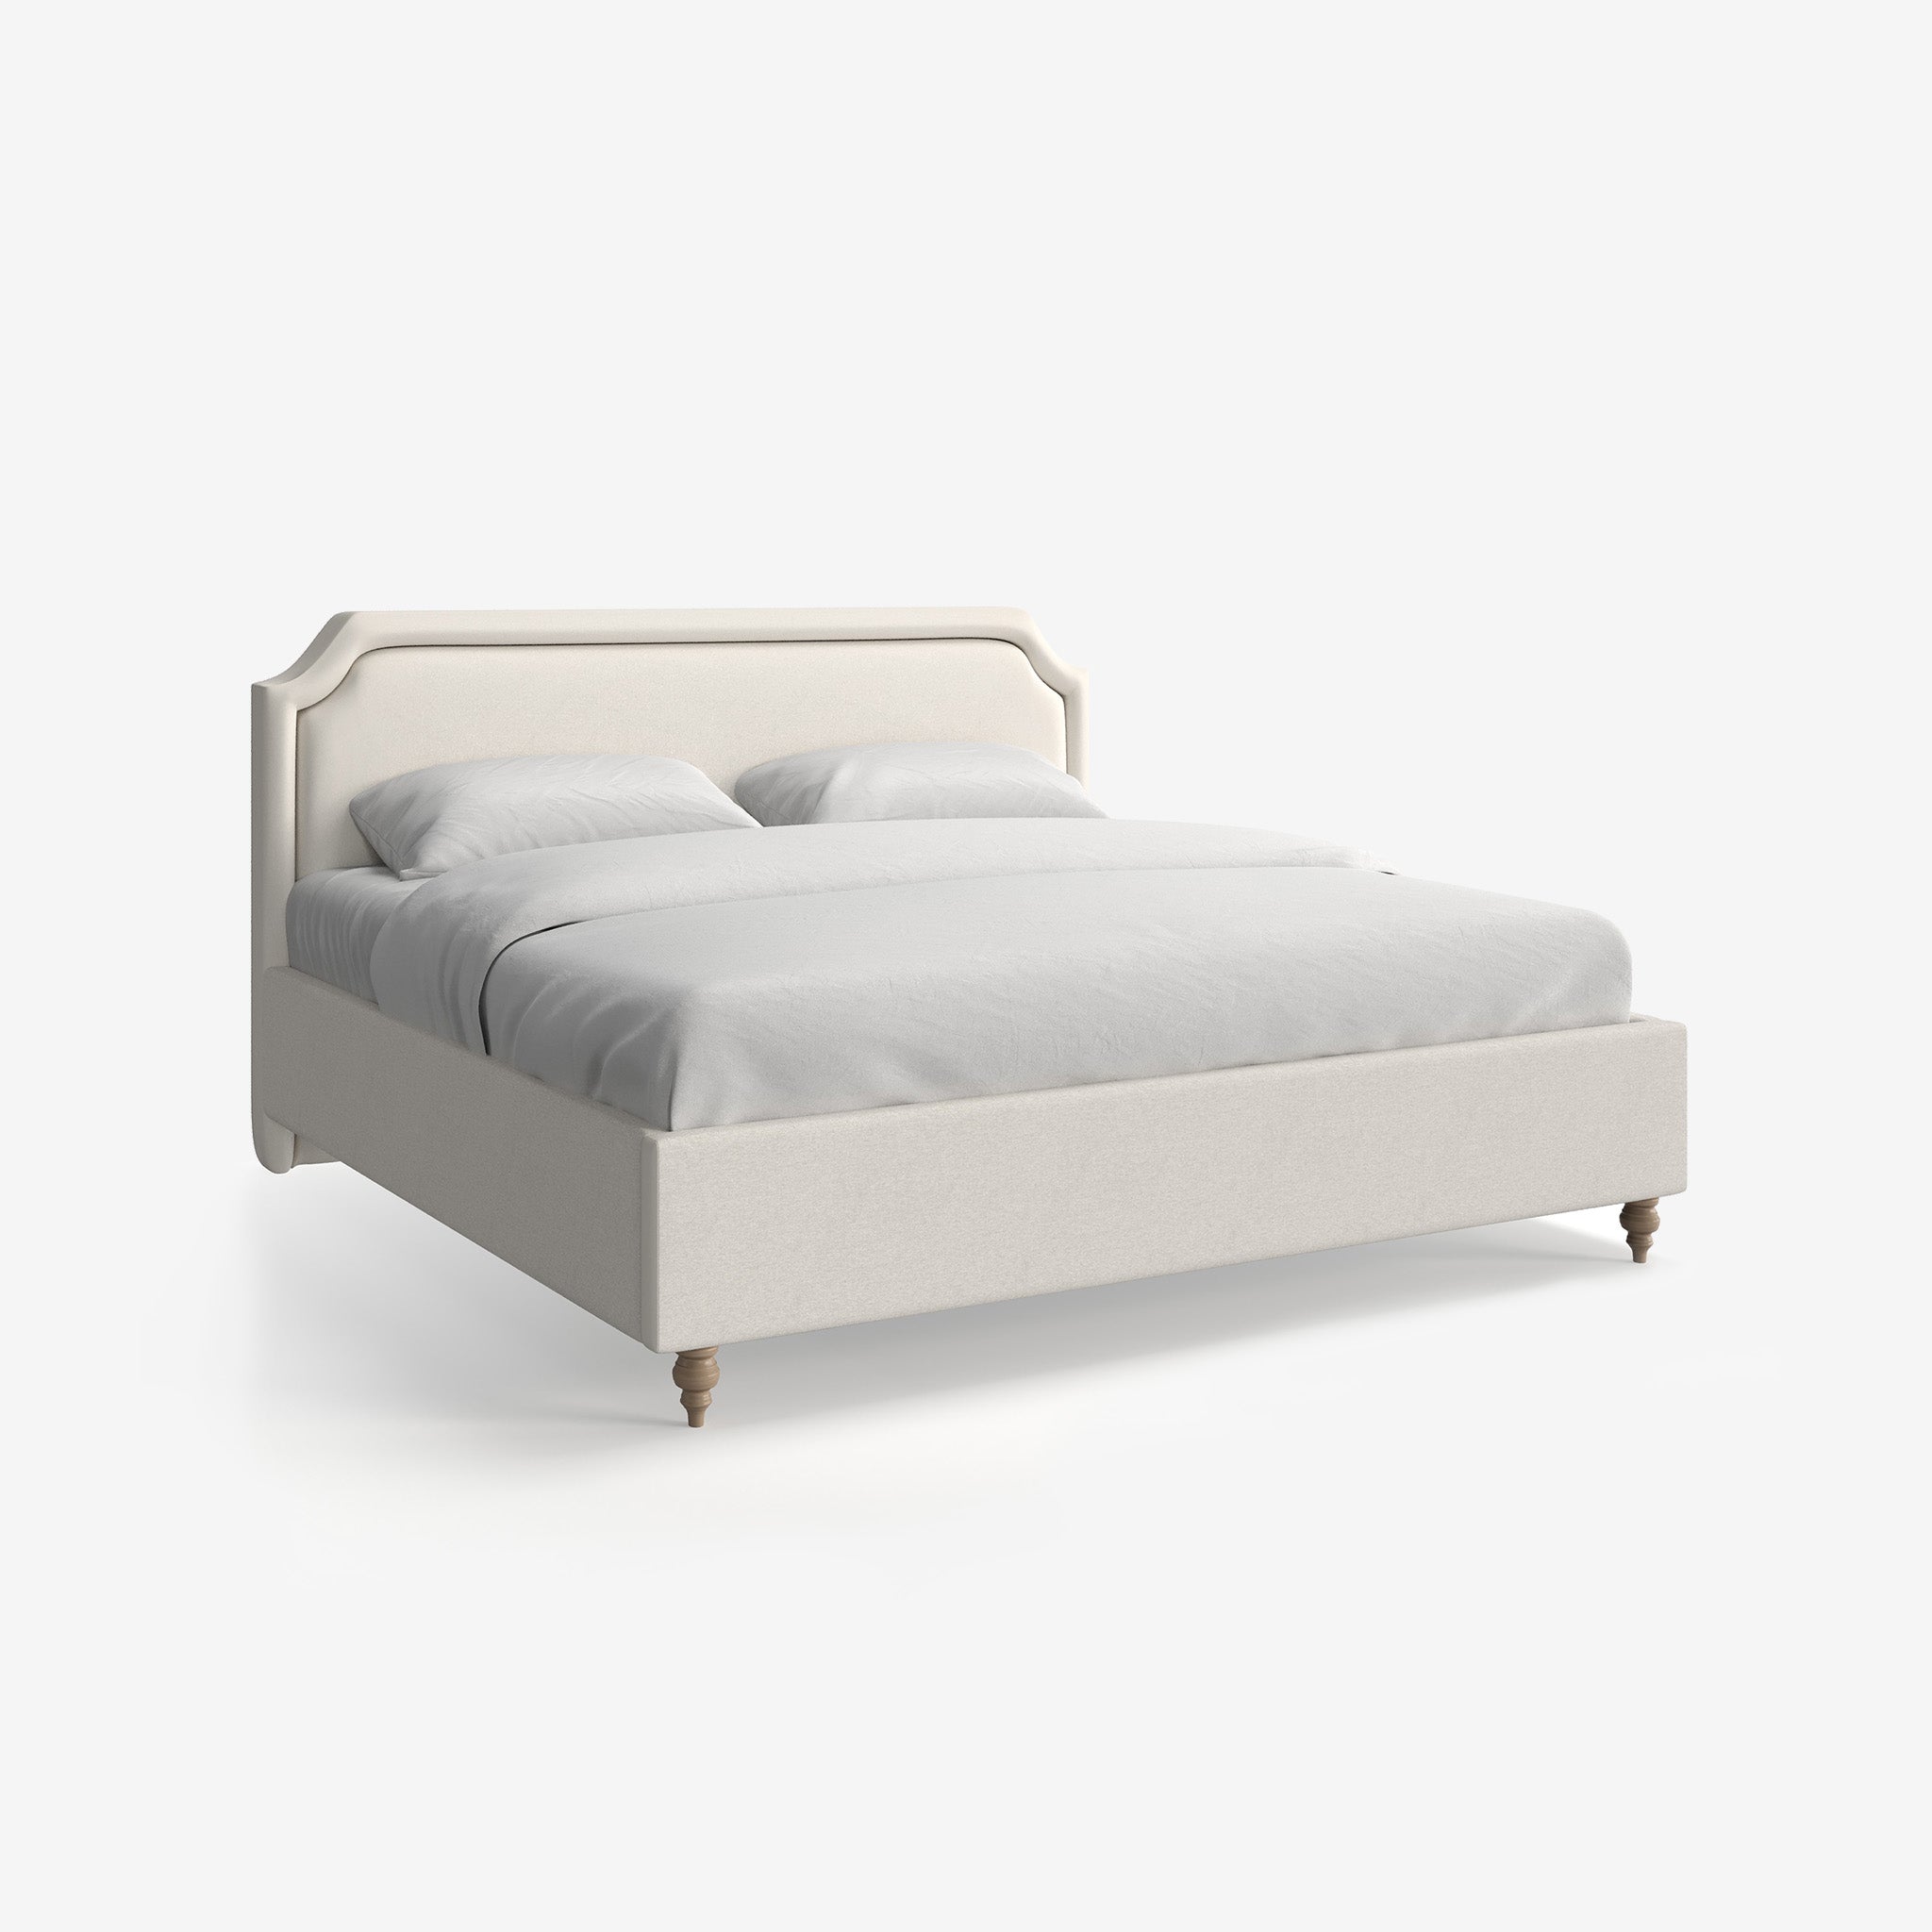 Haley Cotton Linen Upholstered Bed with Fluted Edge Headbaord and end-lift Ottoman Storage, Contemporary Interiors, Online Shopping, Craftsmanship, Wooden feet, Bazaar